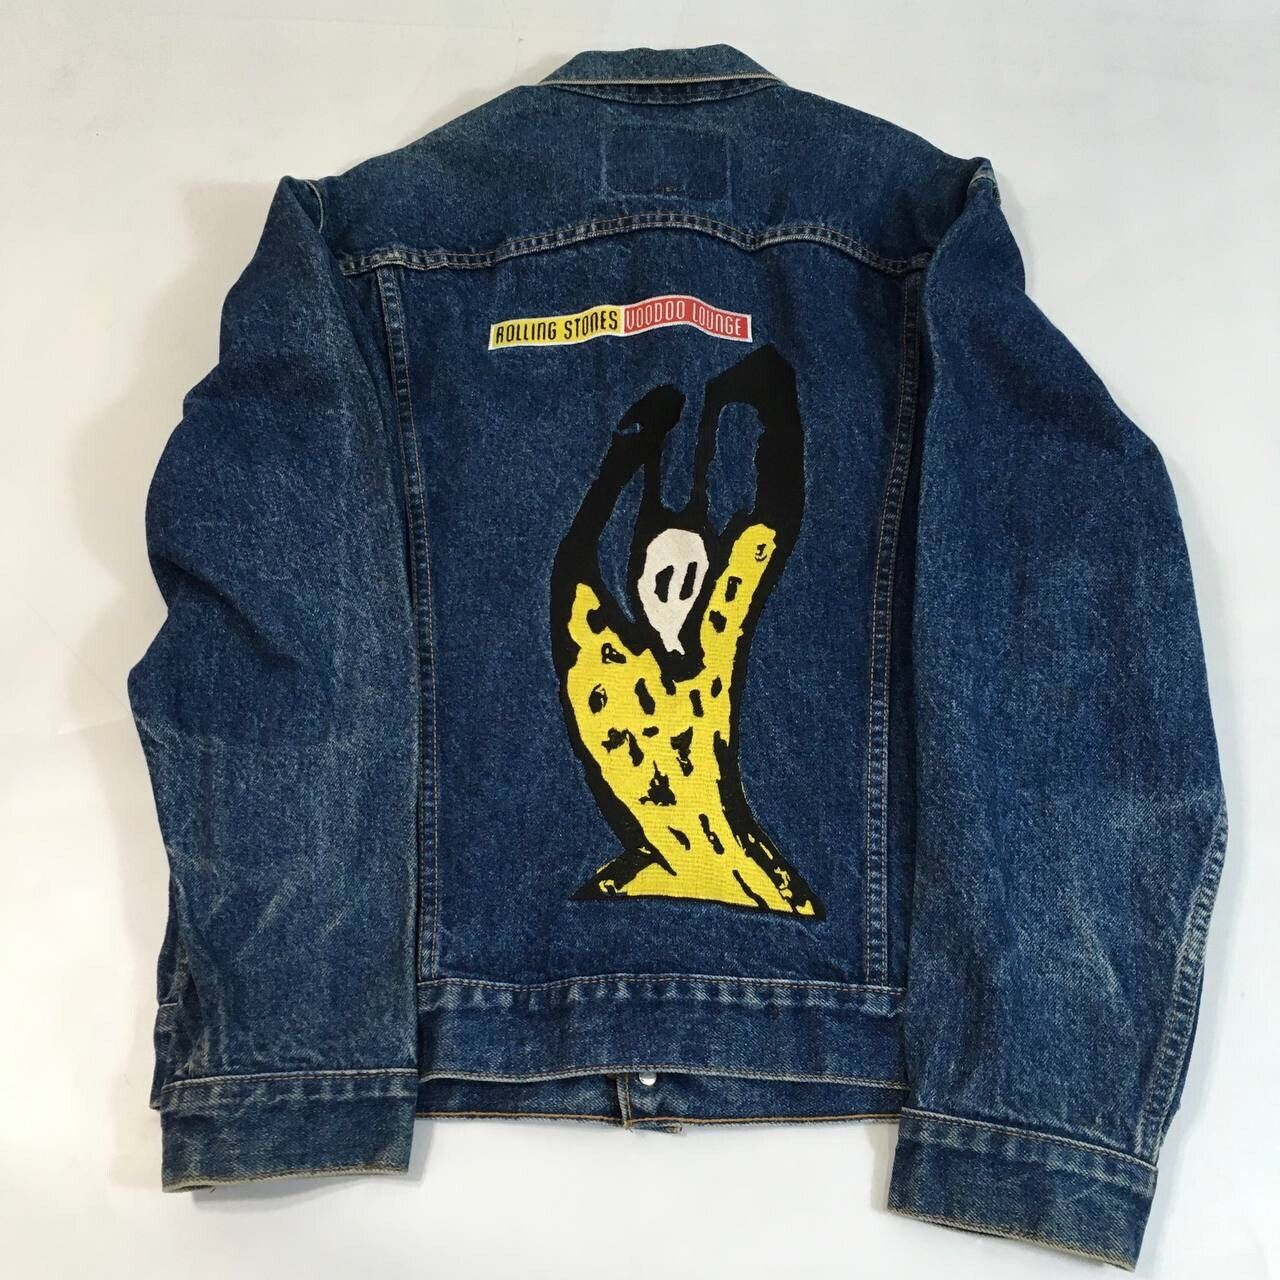 Levi's LEVIS STRAUS 501 USA STREETWEAR VINTAGE 90S ROLLING STONES | Grailed